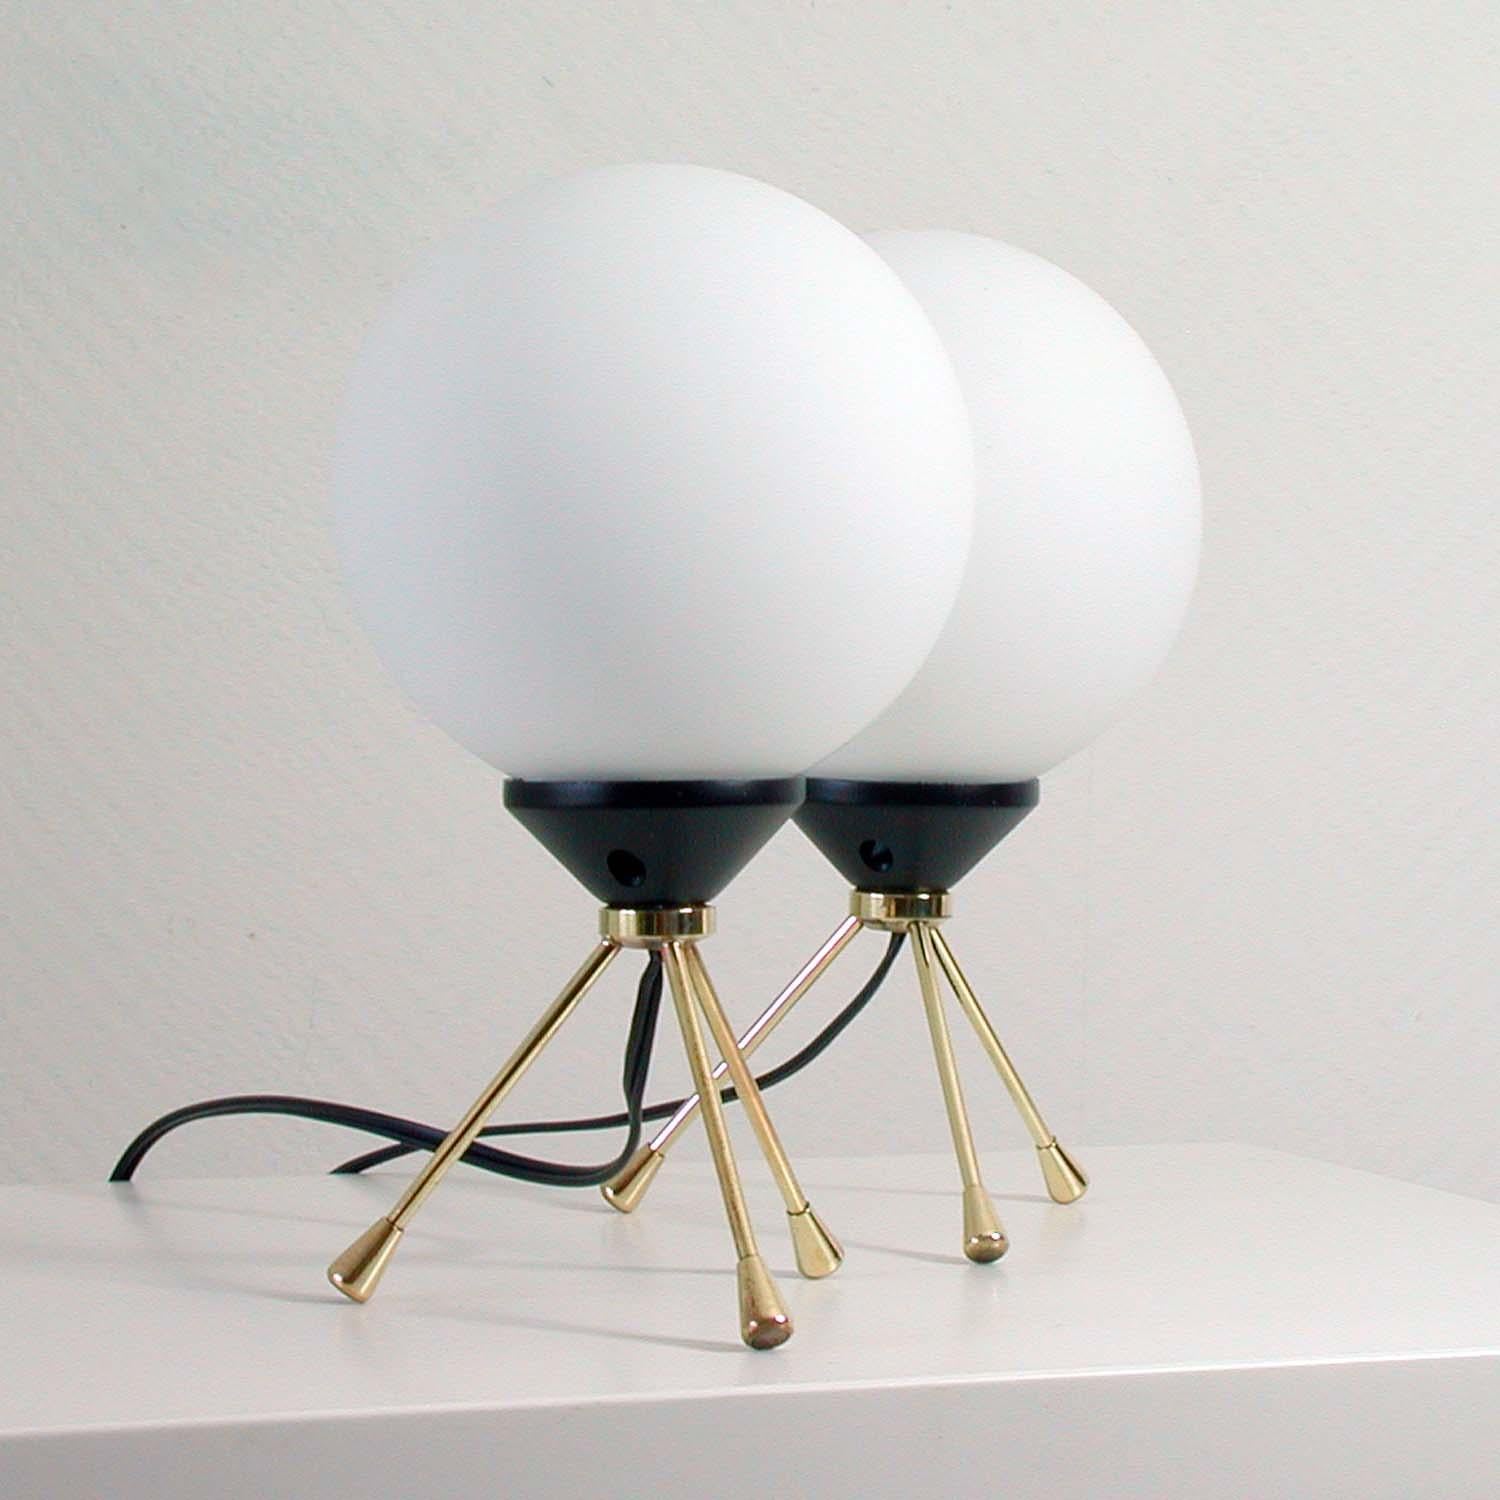 These 2 Sputnik style table lamps were manufactured in Italy in the 1950s. They are made of a brass tripod base with a black plastic bulb holder and white opal glass lampshades.